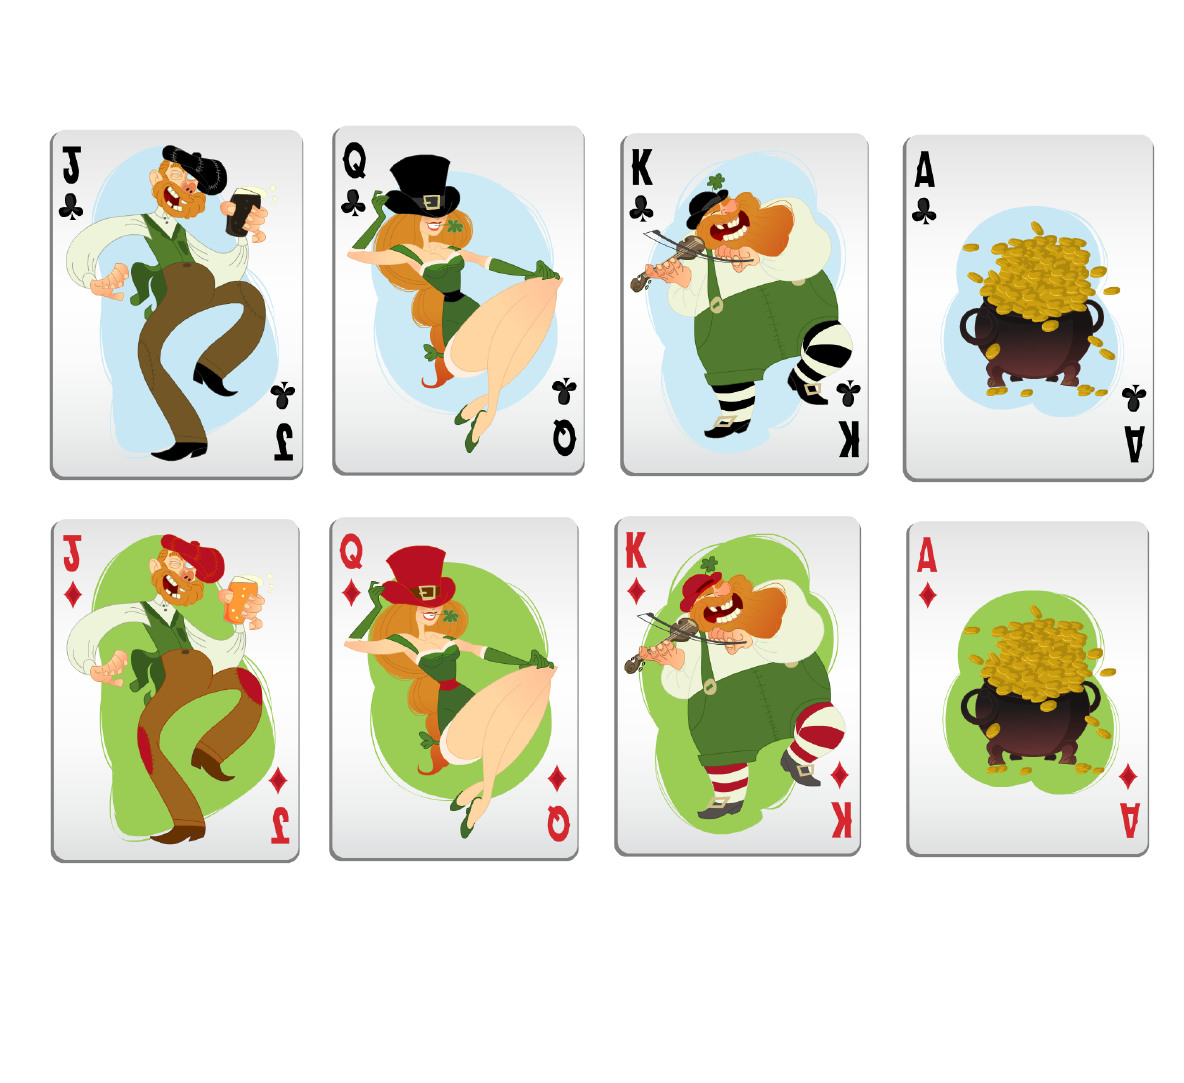 cards Poker game card deck photoshop pinups ace jack king aces spades Flowers diamonds play